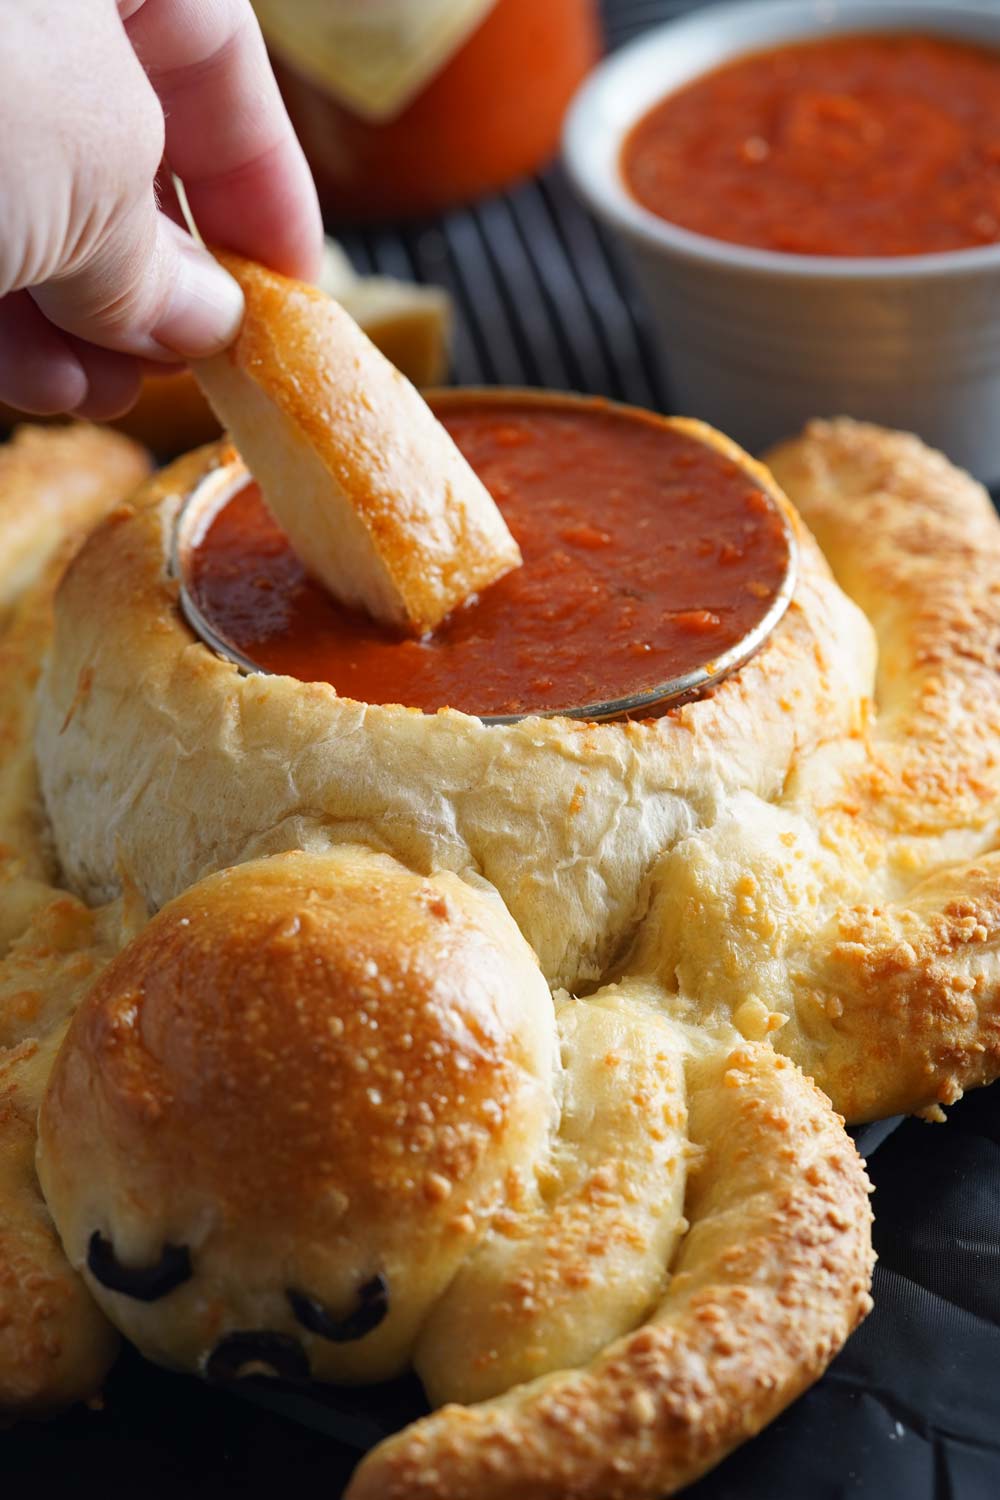 Dipping a breadstick into the Spider breadstick bowl for Halloween